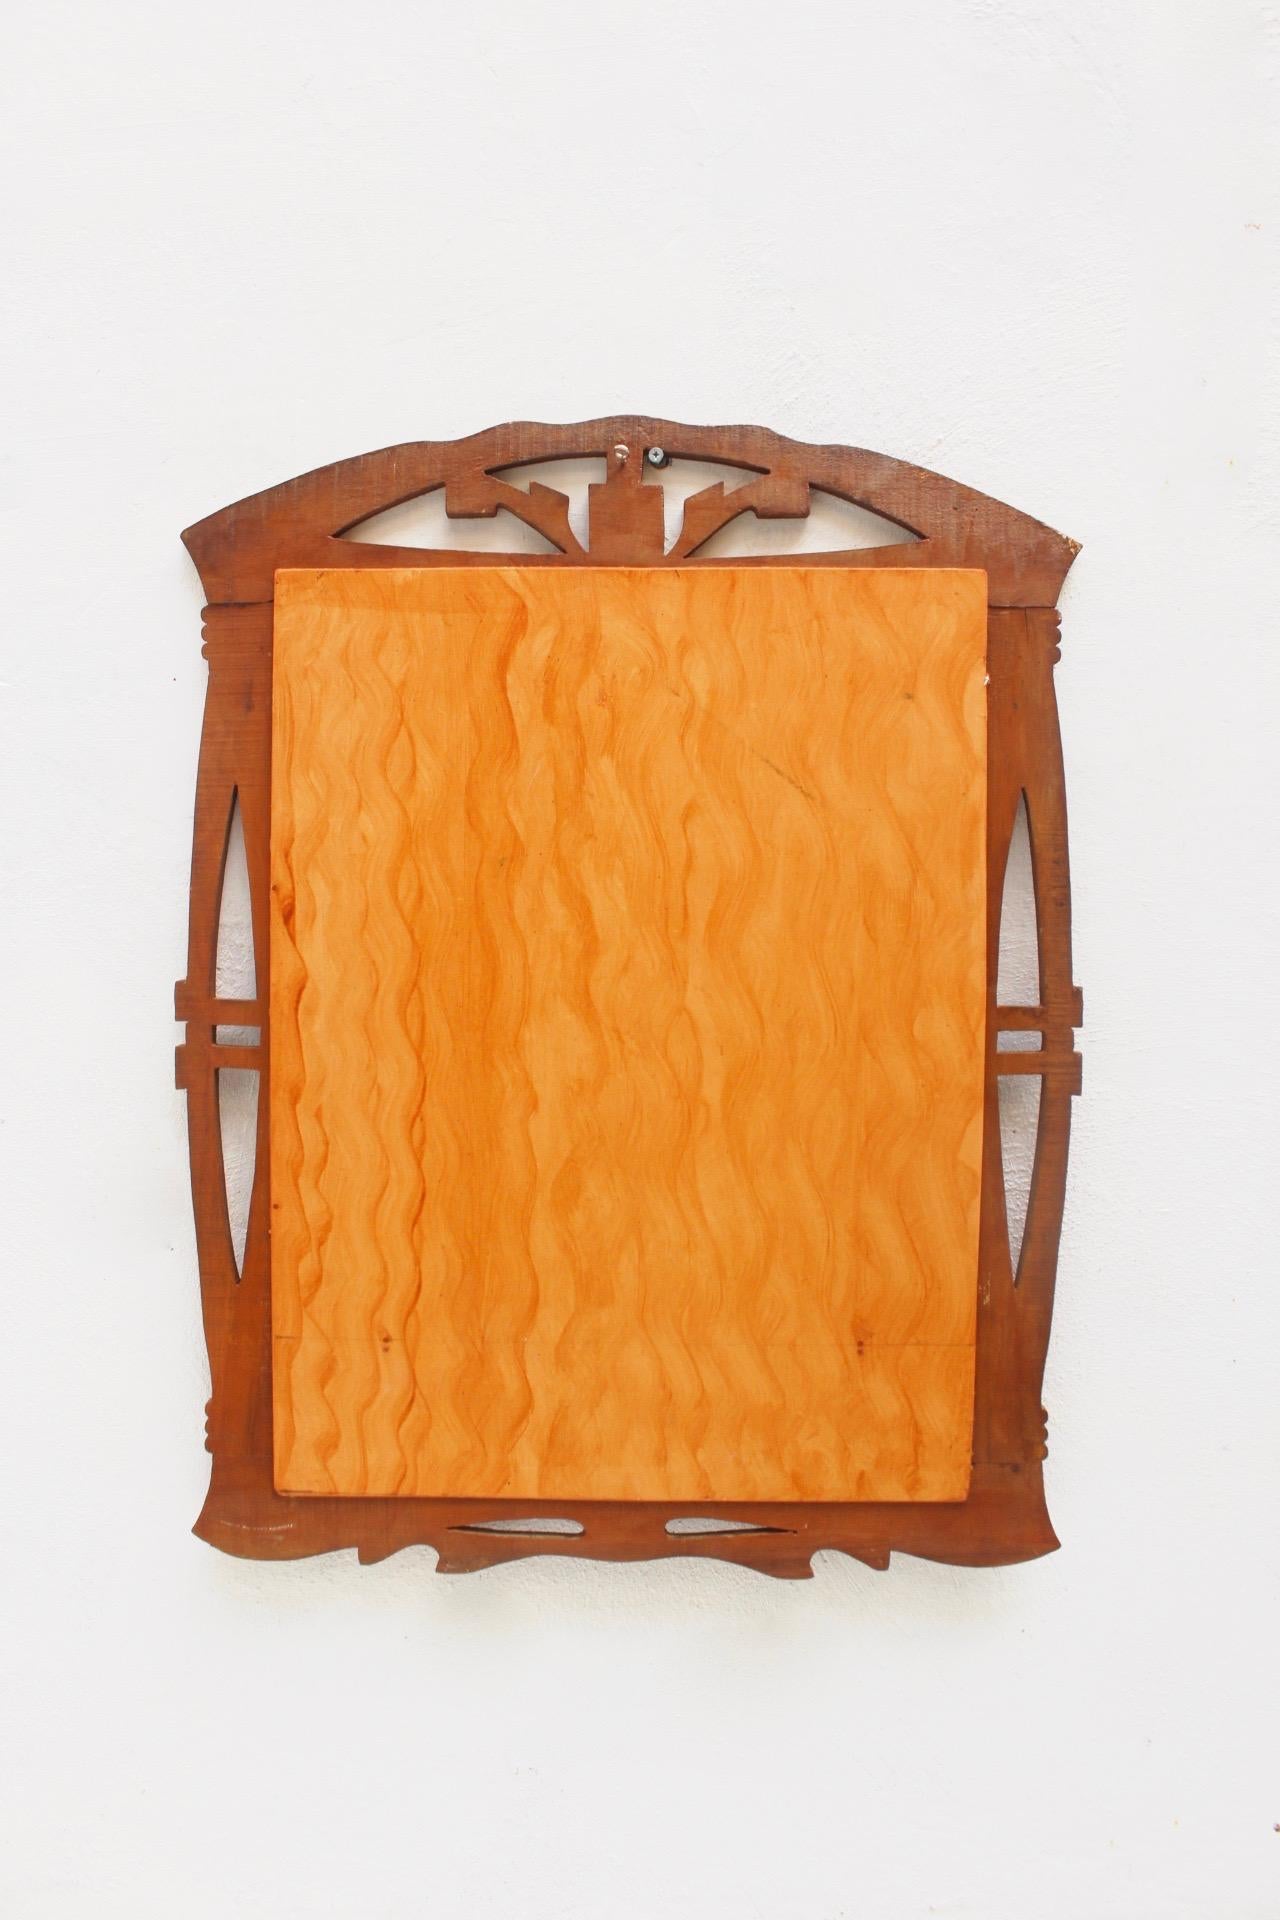 20th Century Art Nouveau or Modernist Spanish Wood Wall Mirror, 1910s For Sale